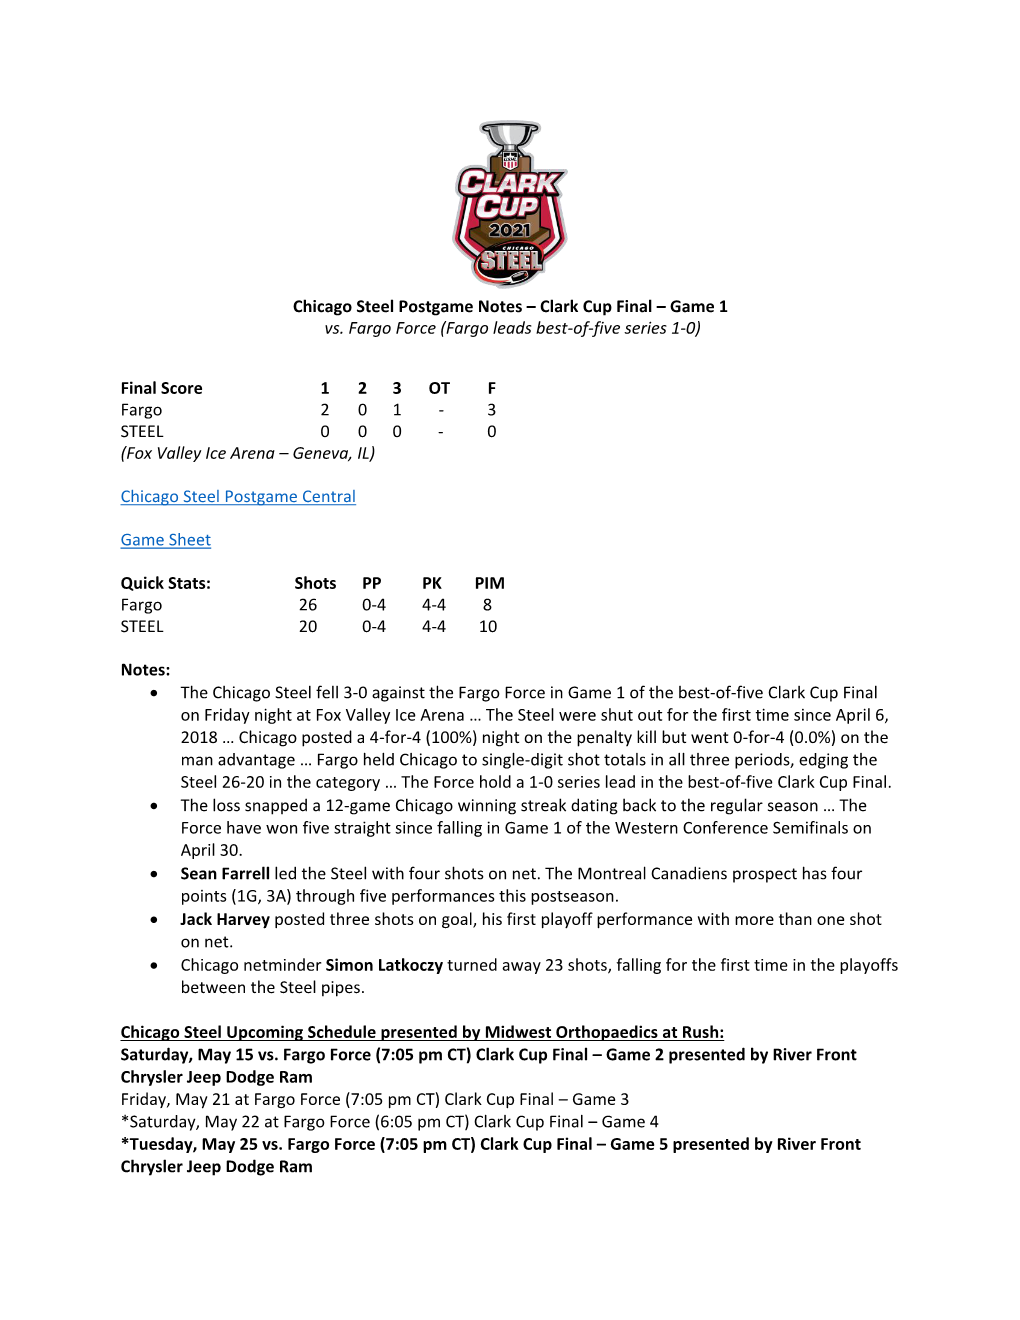 Chicago Steel Postgame Notes – Clark Cup Final – Game 1 Vs. Fargo Force (Fargo Leads Best-Of-Five Series 1-0)